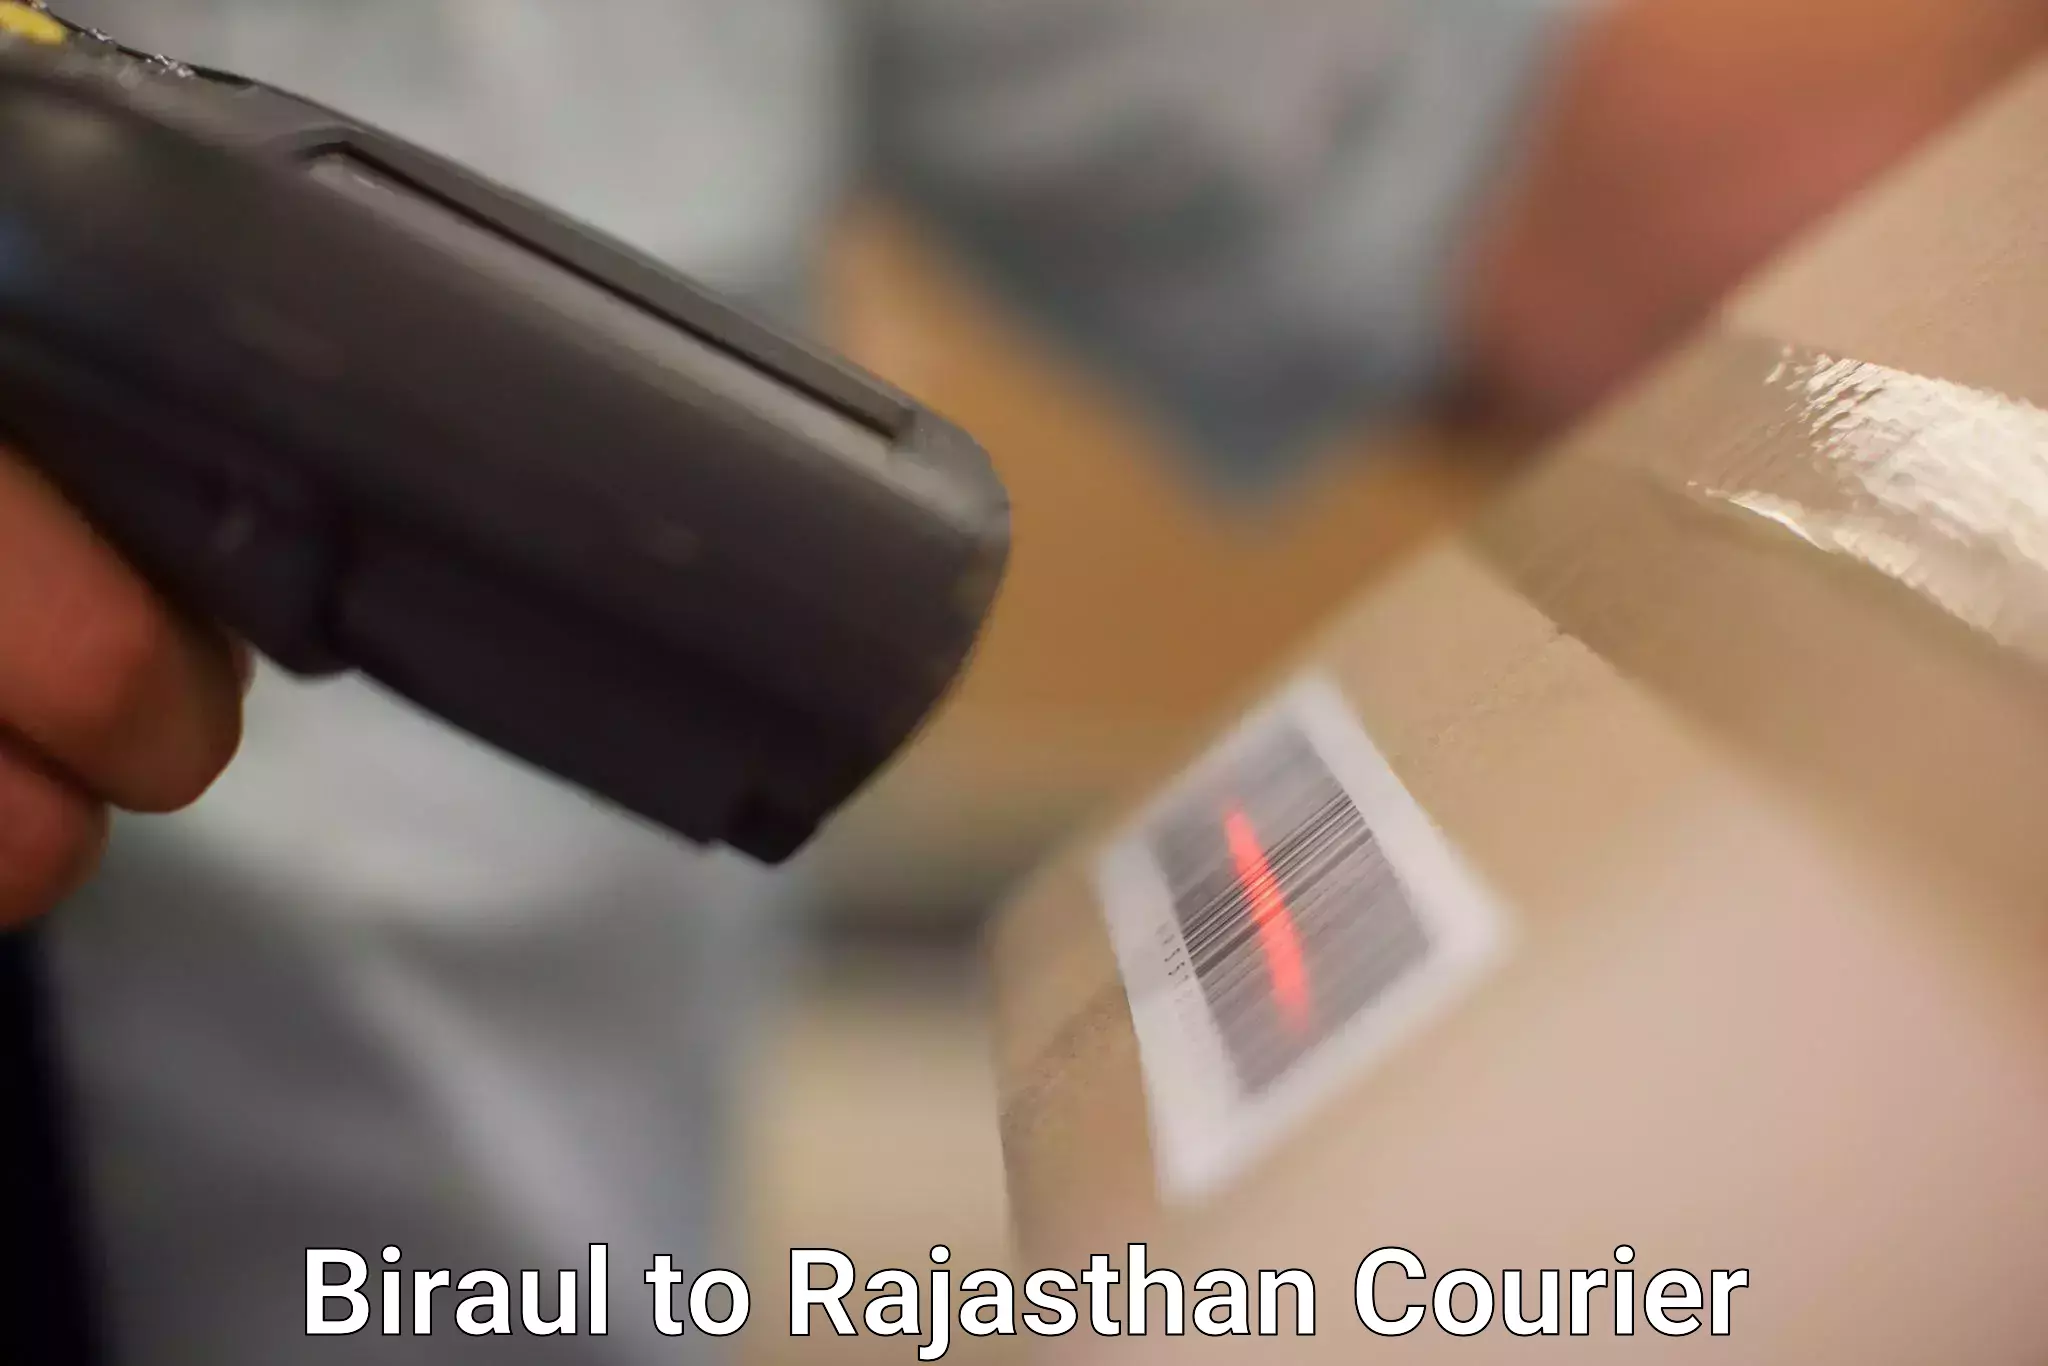 State-of-the-art courier technology Biraul to Gotan